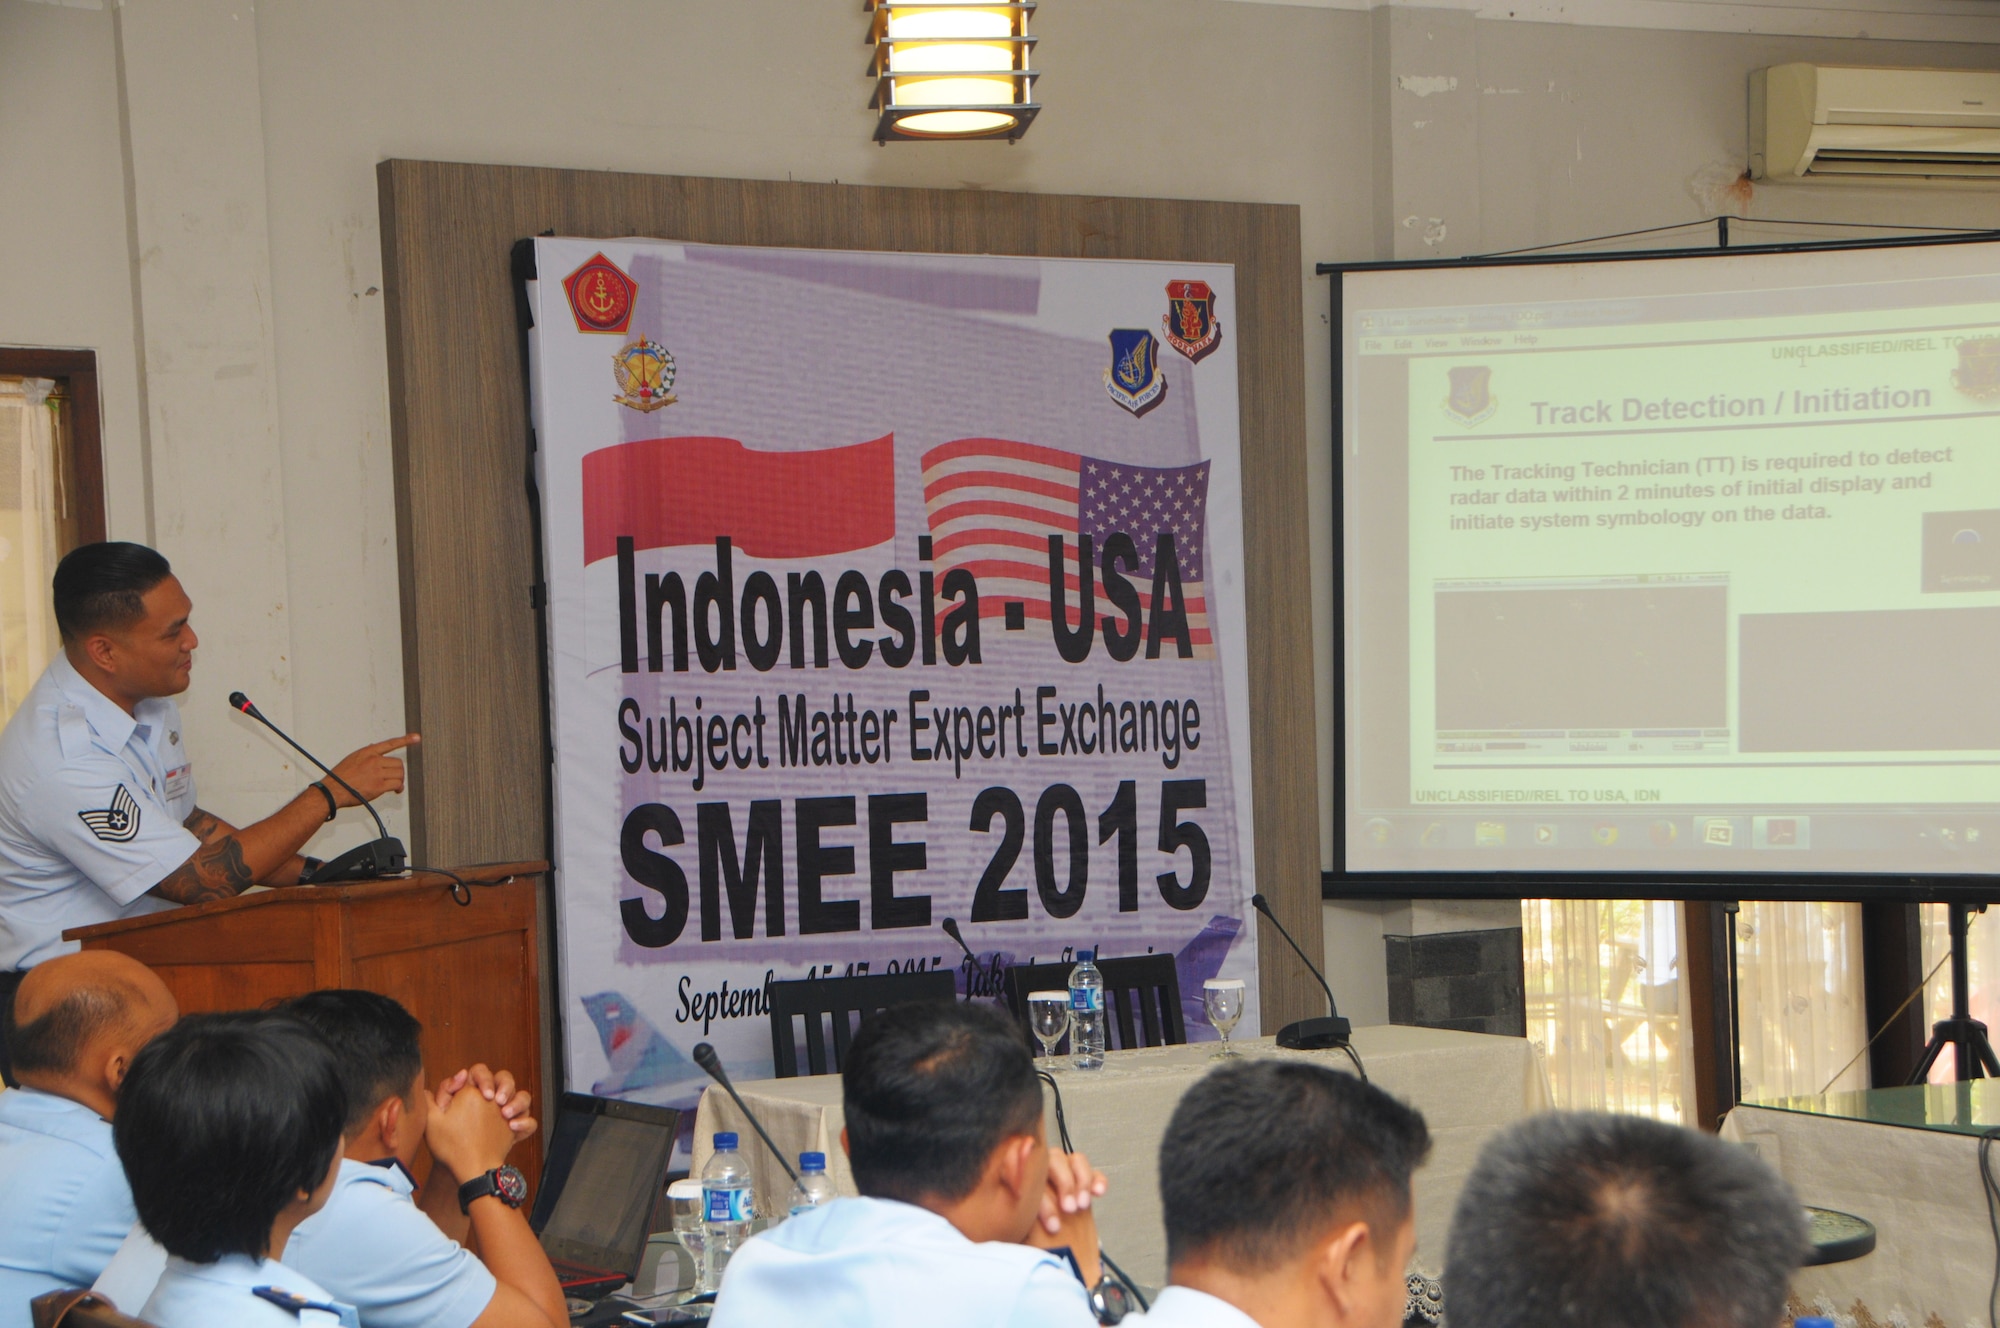 Tech. Sgt. Jacy Lau, an Air Surveillance Technician with the 169th Air Defense Squadron briefs track detection and initiation to members of Kohanudnas, the component of the Indonesian Armed Forces responsible for air defense, Sept. 16, 2015, Jakarta, Indonesia. As part of the National Guard's State Partnership Program, members of the HIANG participated in an air defense subject matter expert exchange with counterparts from Indonesia. (U.S. Air National Guard photo by Senior Airman Orlando Corpuz/released)
